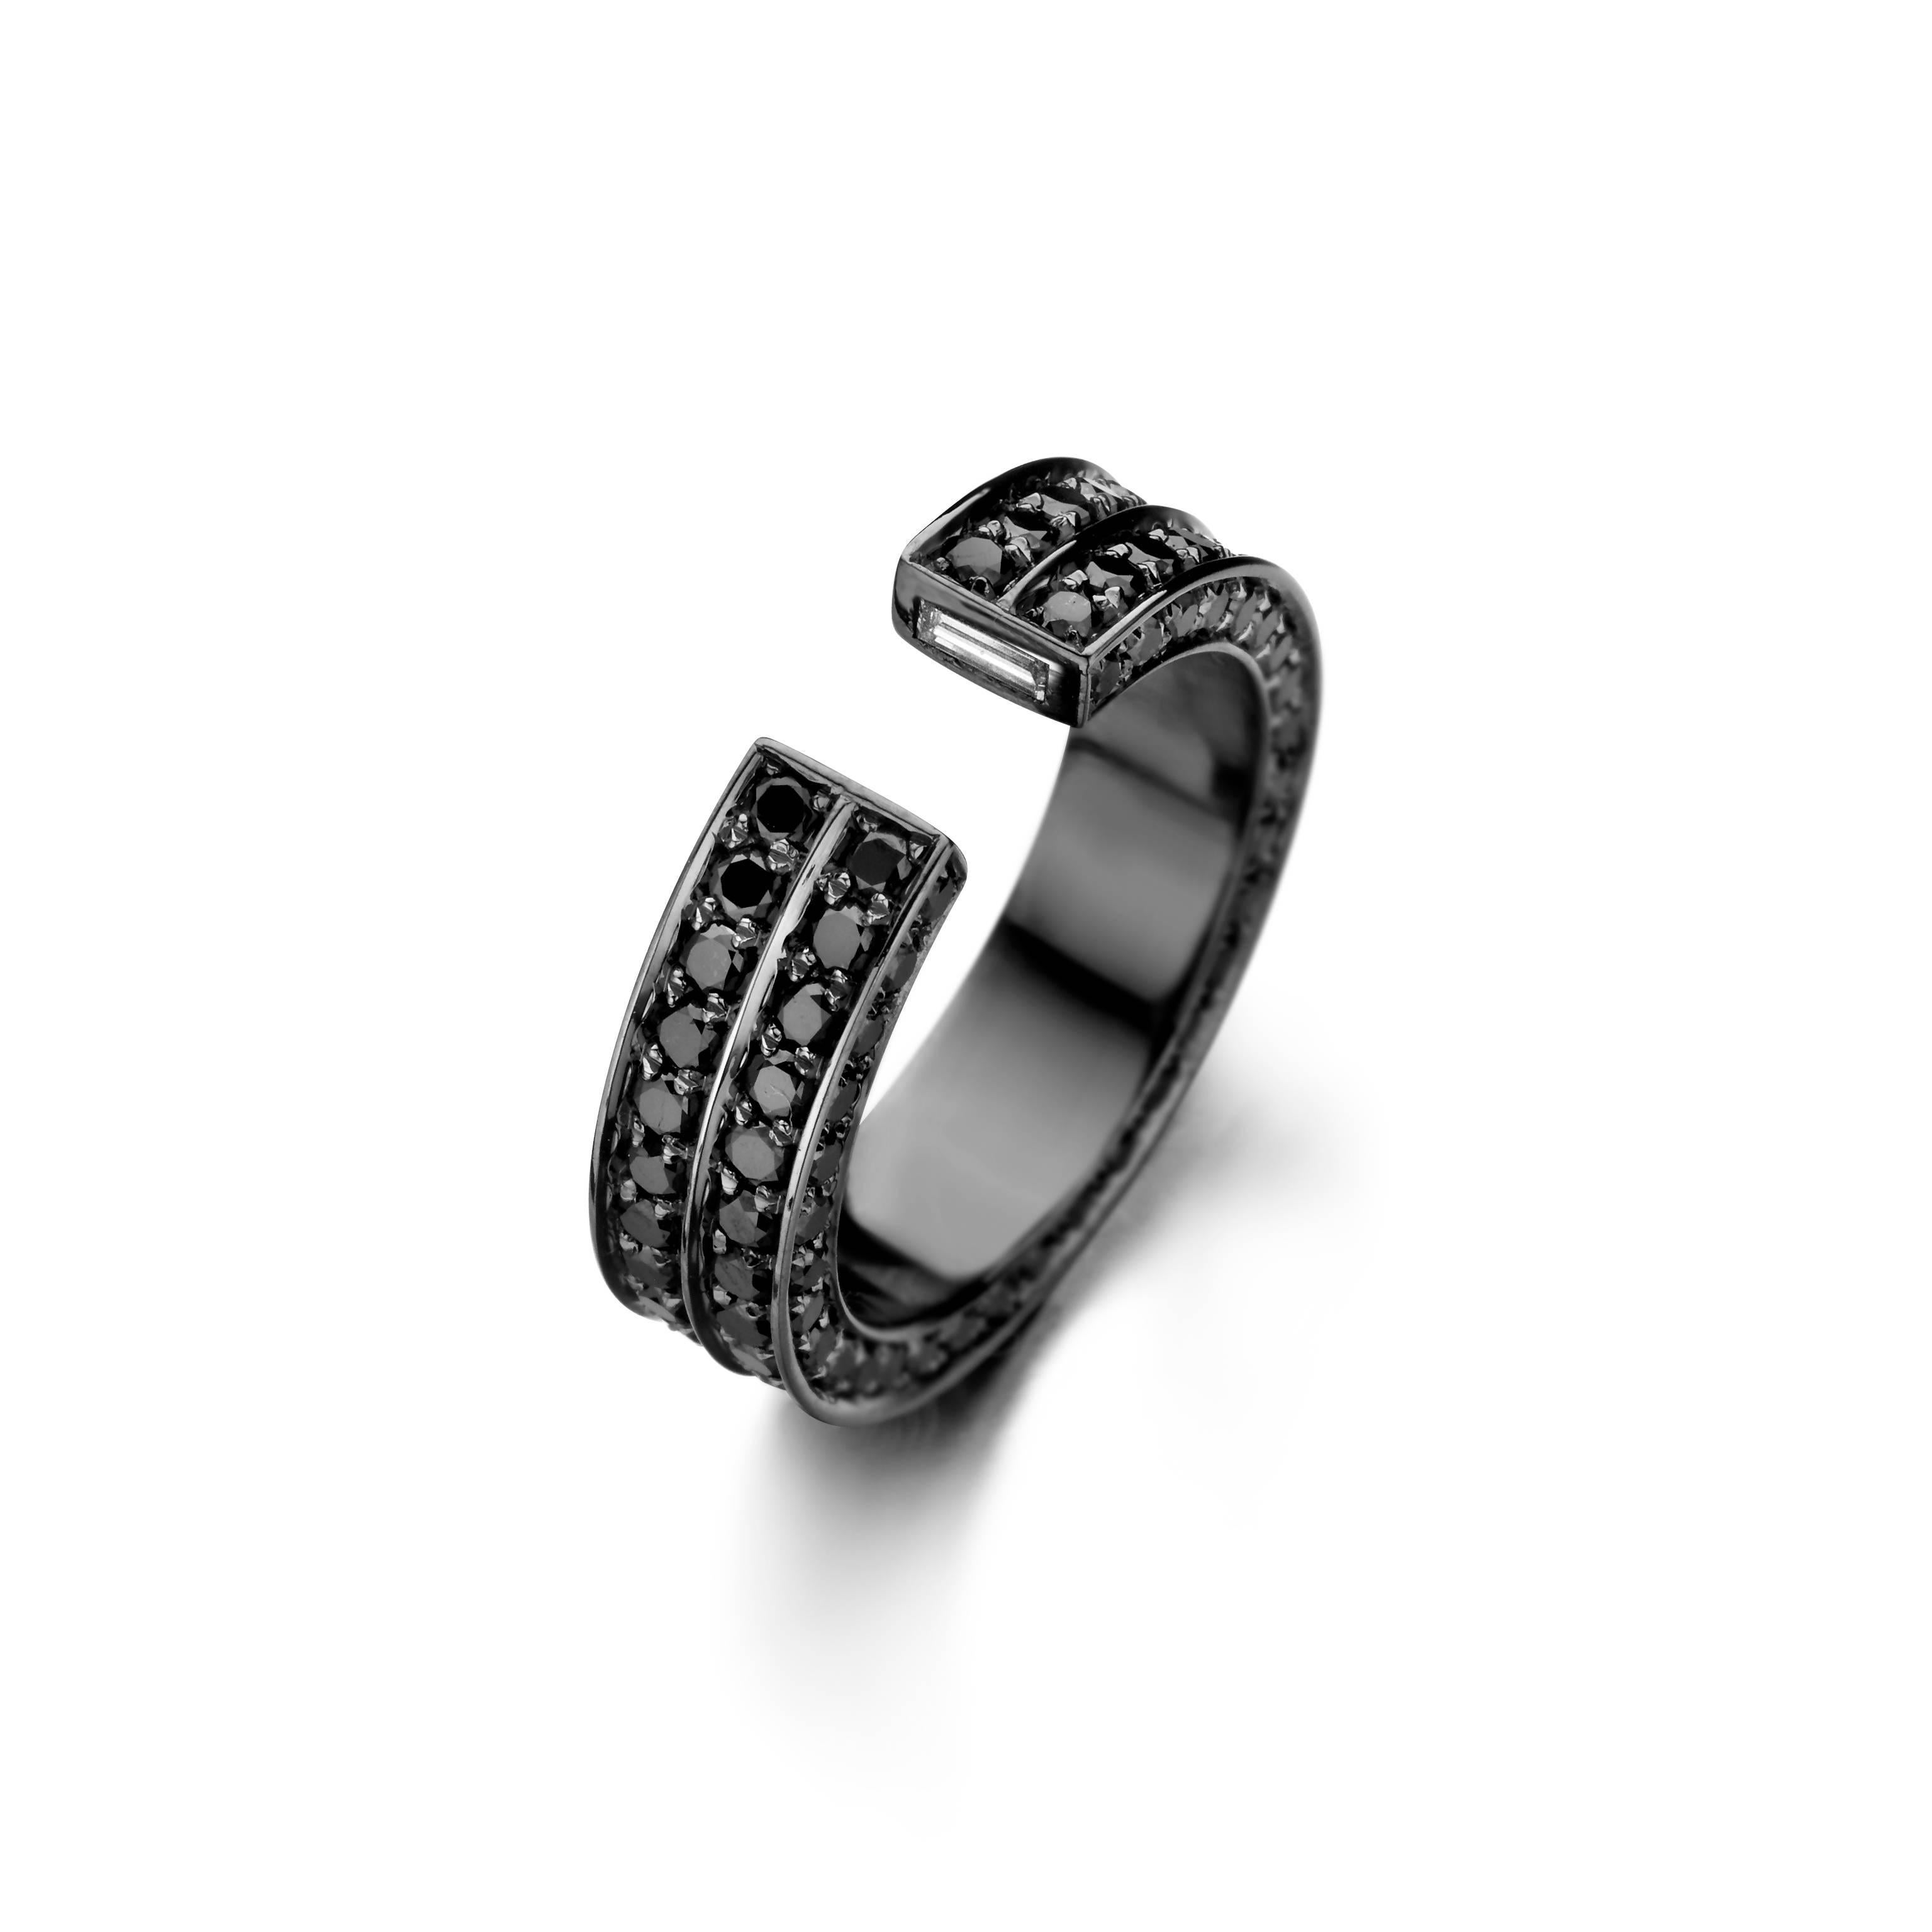 The BRUTE 18-karat gold ring has the appearance of two styles stacked together. Expertly handset with black diamonds and 2 baguette cut white diamonds, this piece is sure to make a refined statement. Wear yours solo.

Black, Natural Diamond 
Total